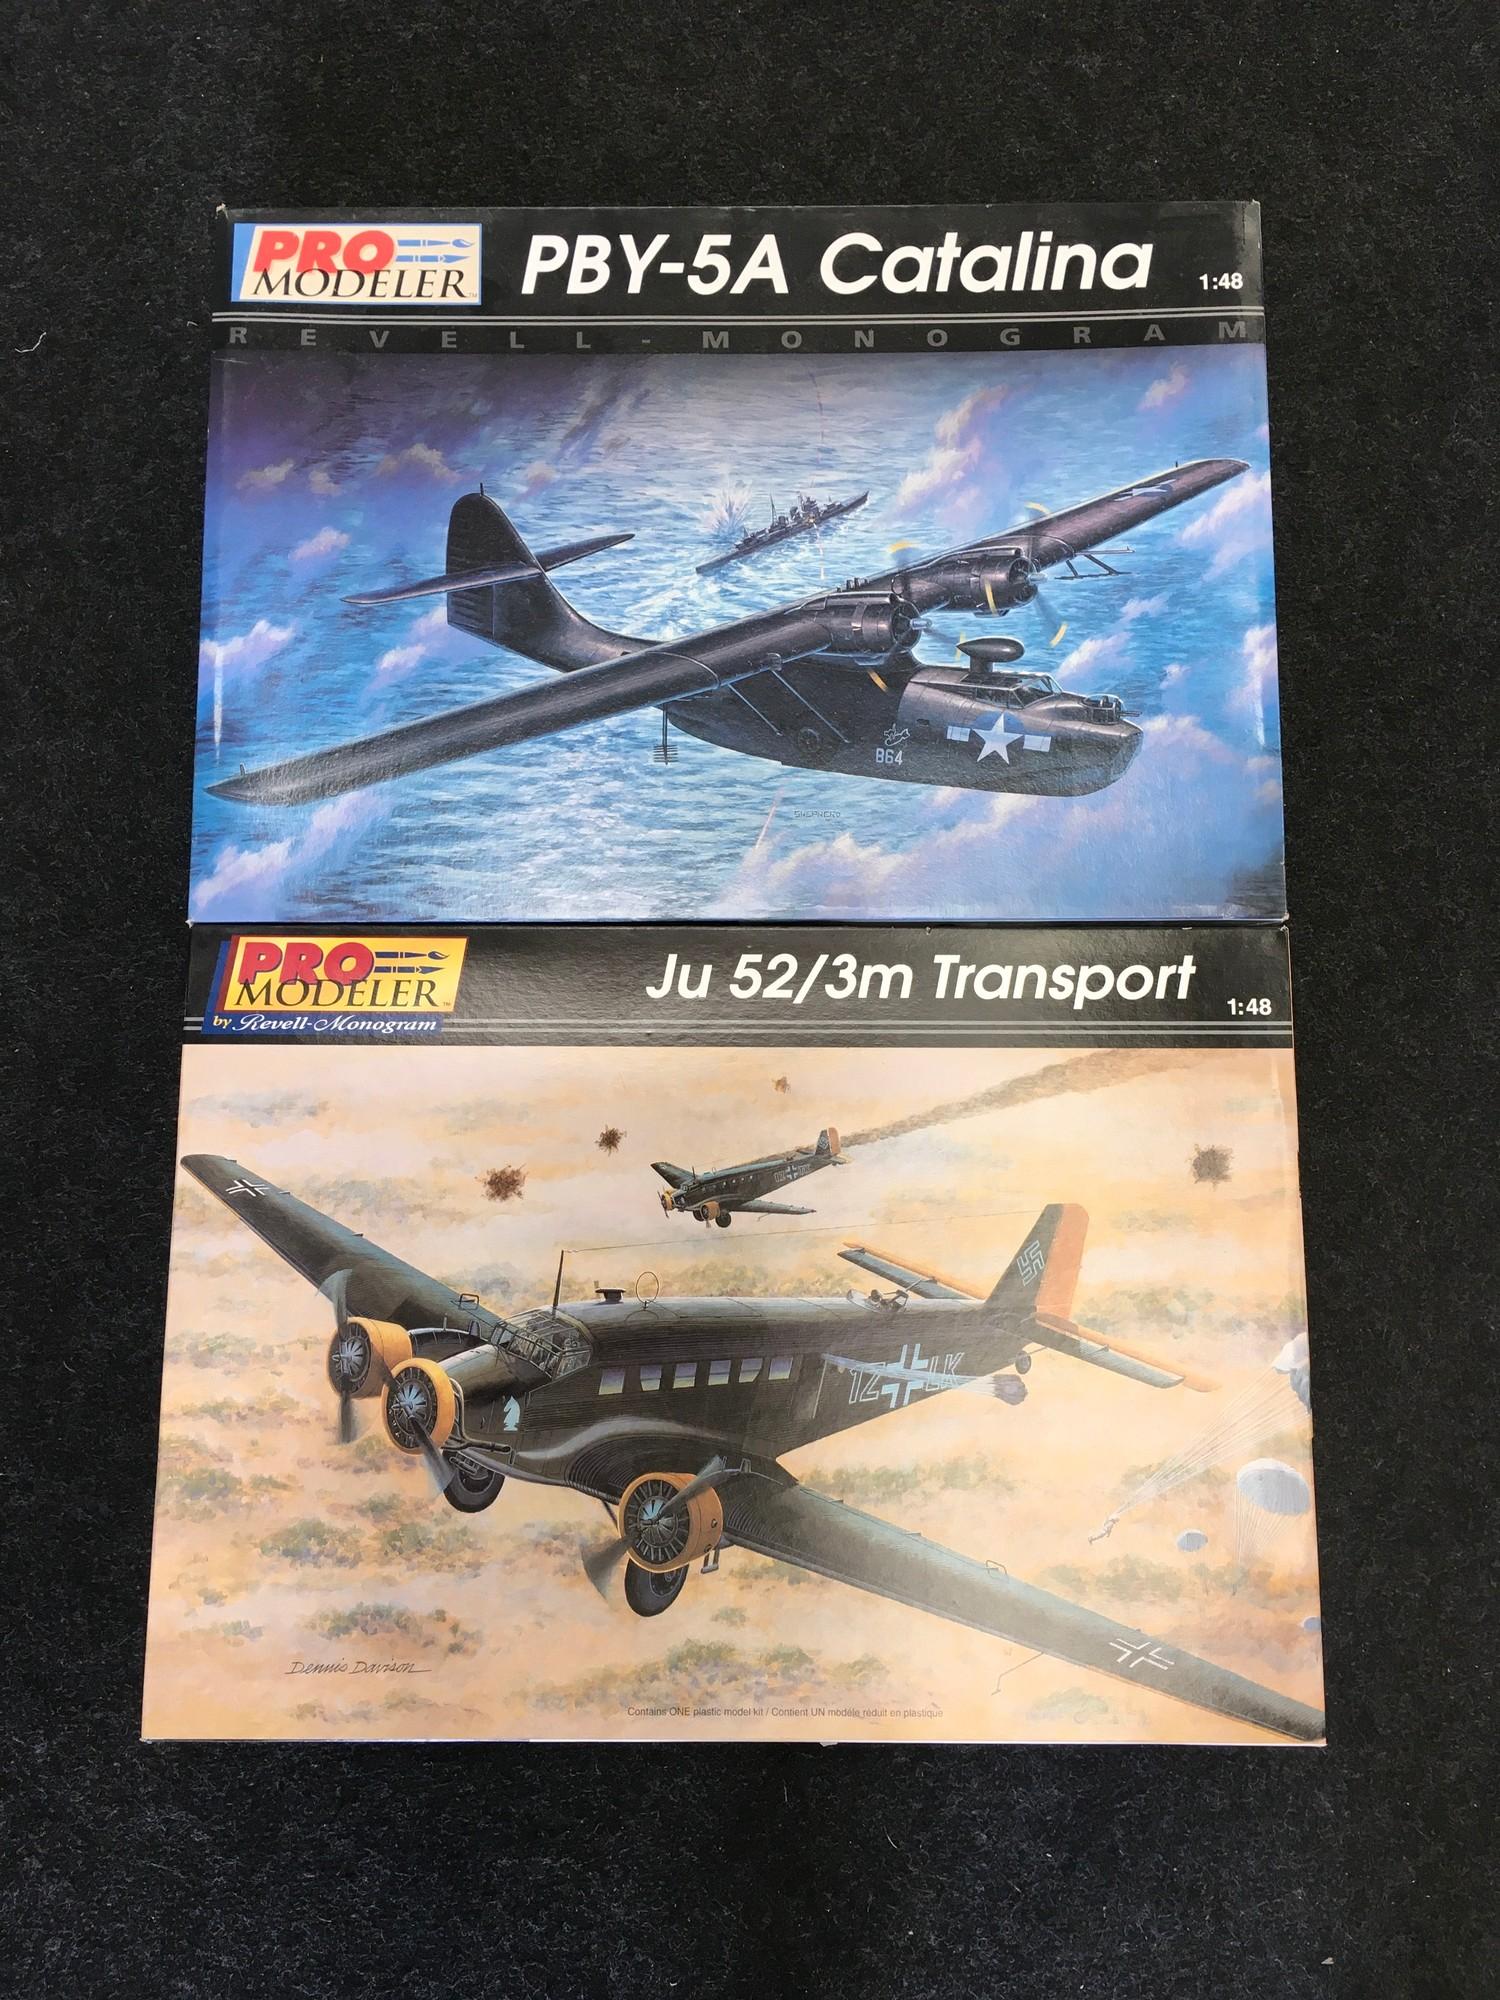 Pro Modeler two boxed model airplane kits: PBY-5A Catalina and Ju 52/3m Transport. Unchecked for